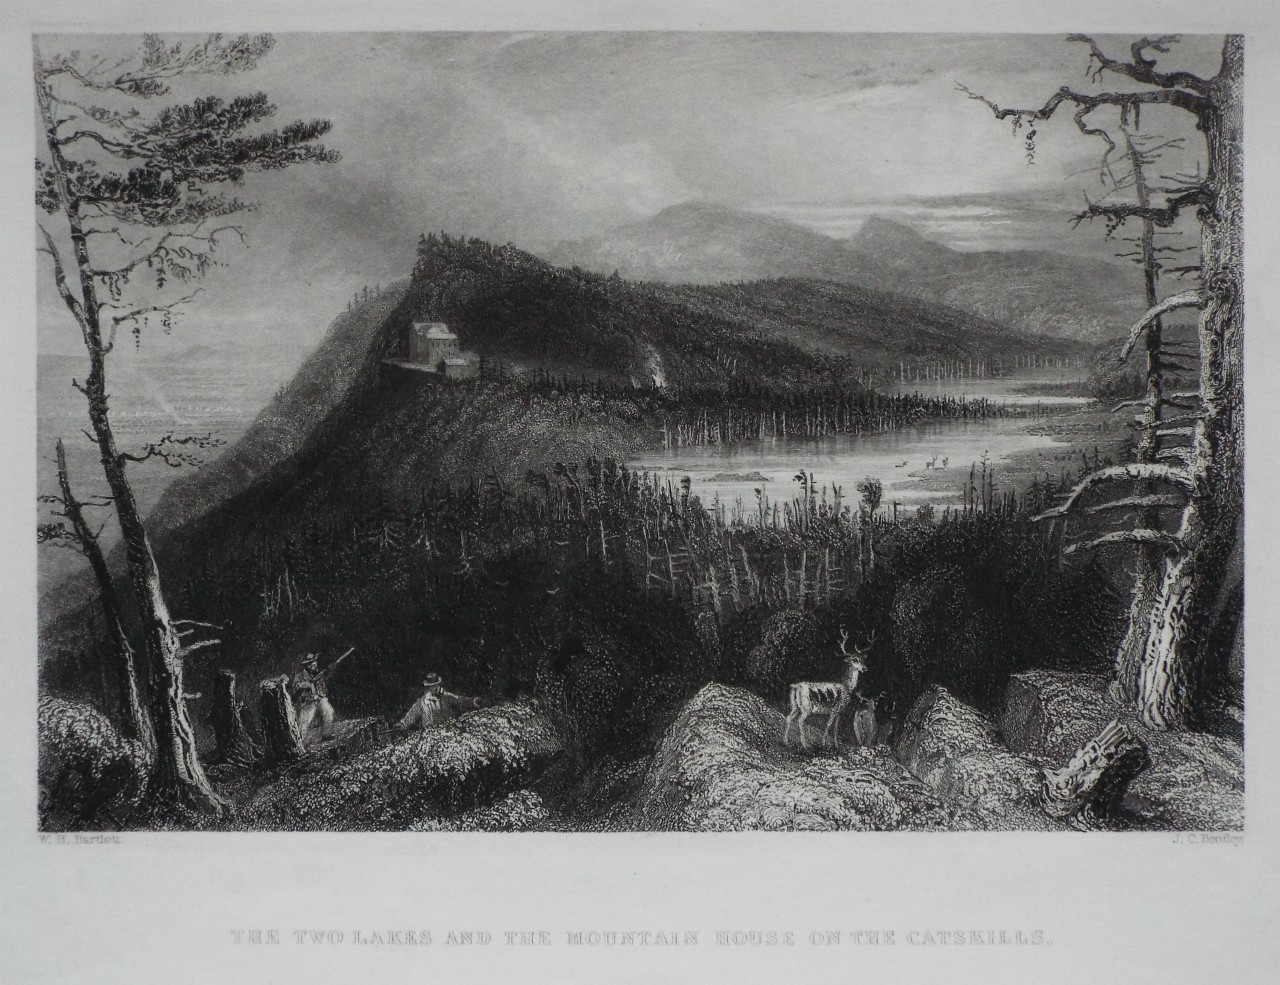 Print - The Two Lakes and the Mountain House on the Catskills. - Bentley